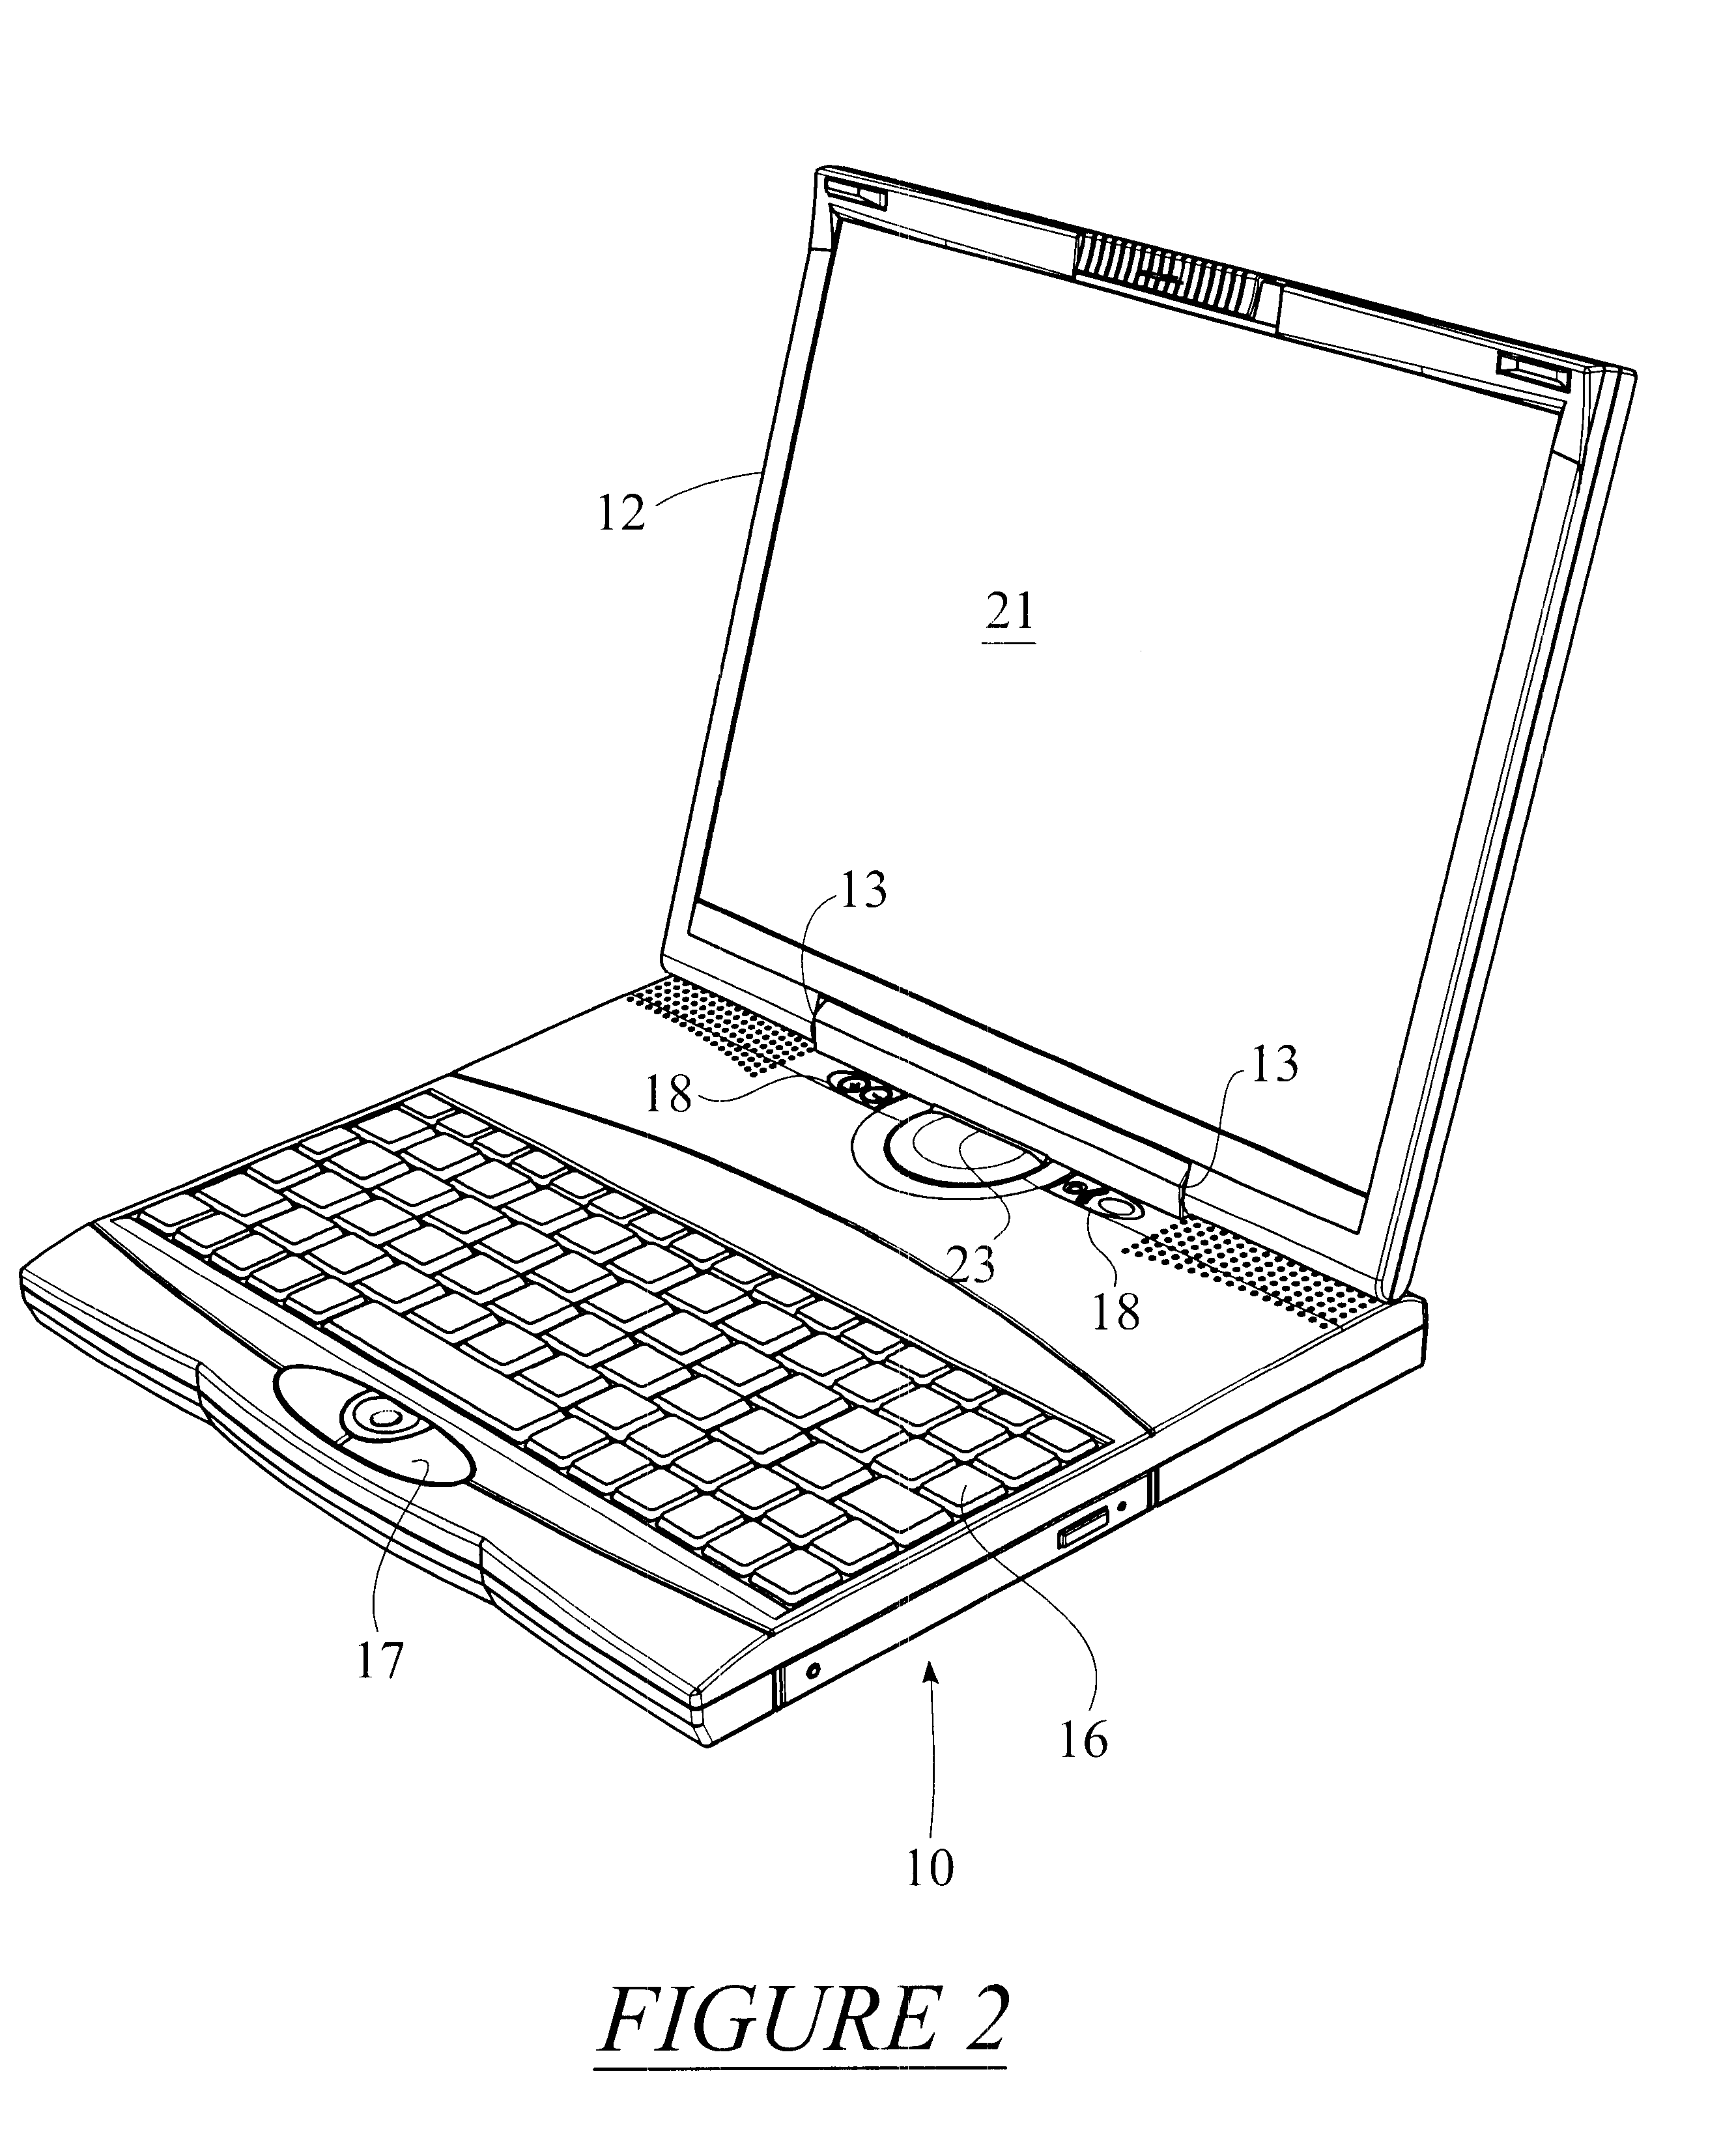 Two-way display notebook computer